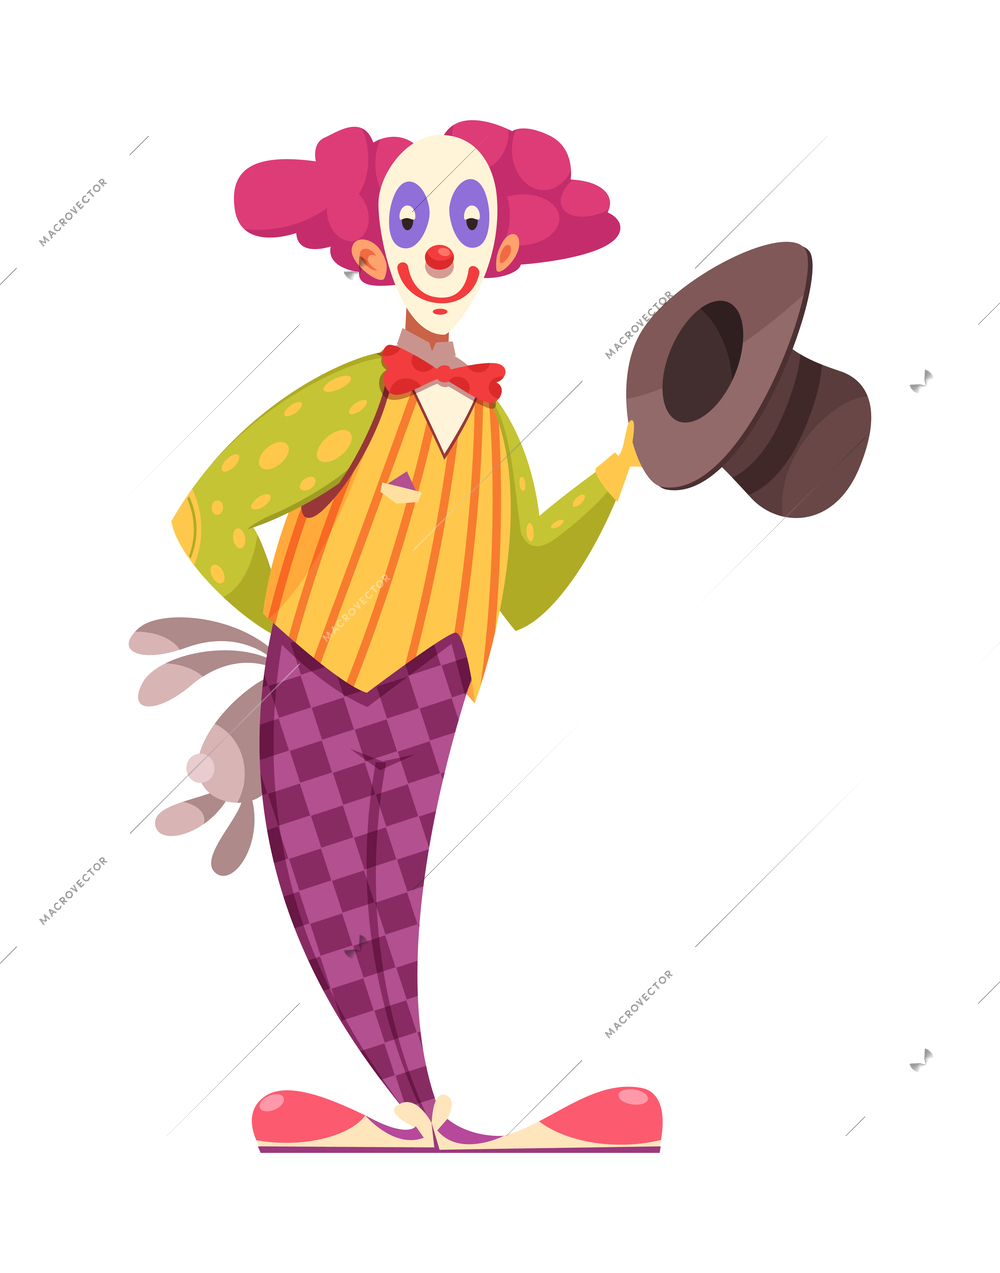 Cartoon clown holding hat and rabbit behind his back vector illustration